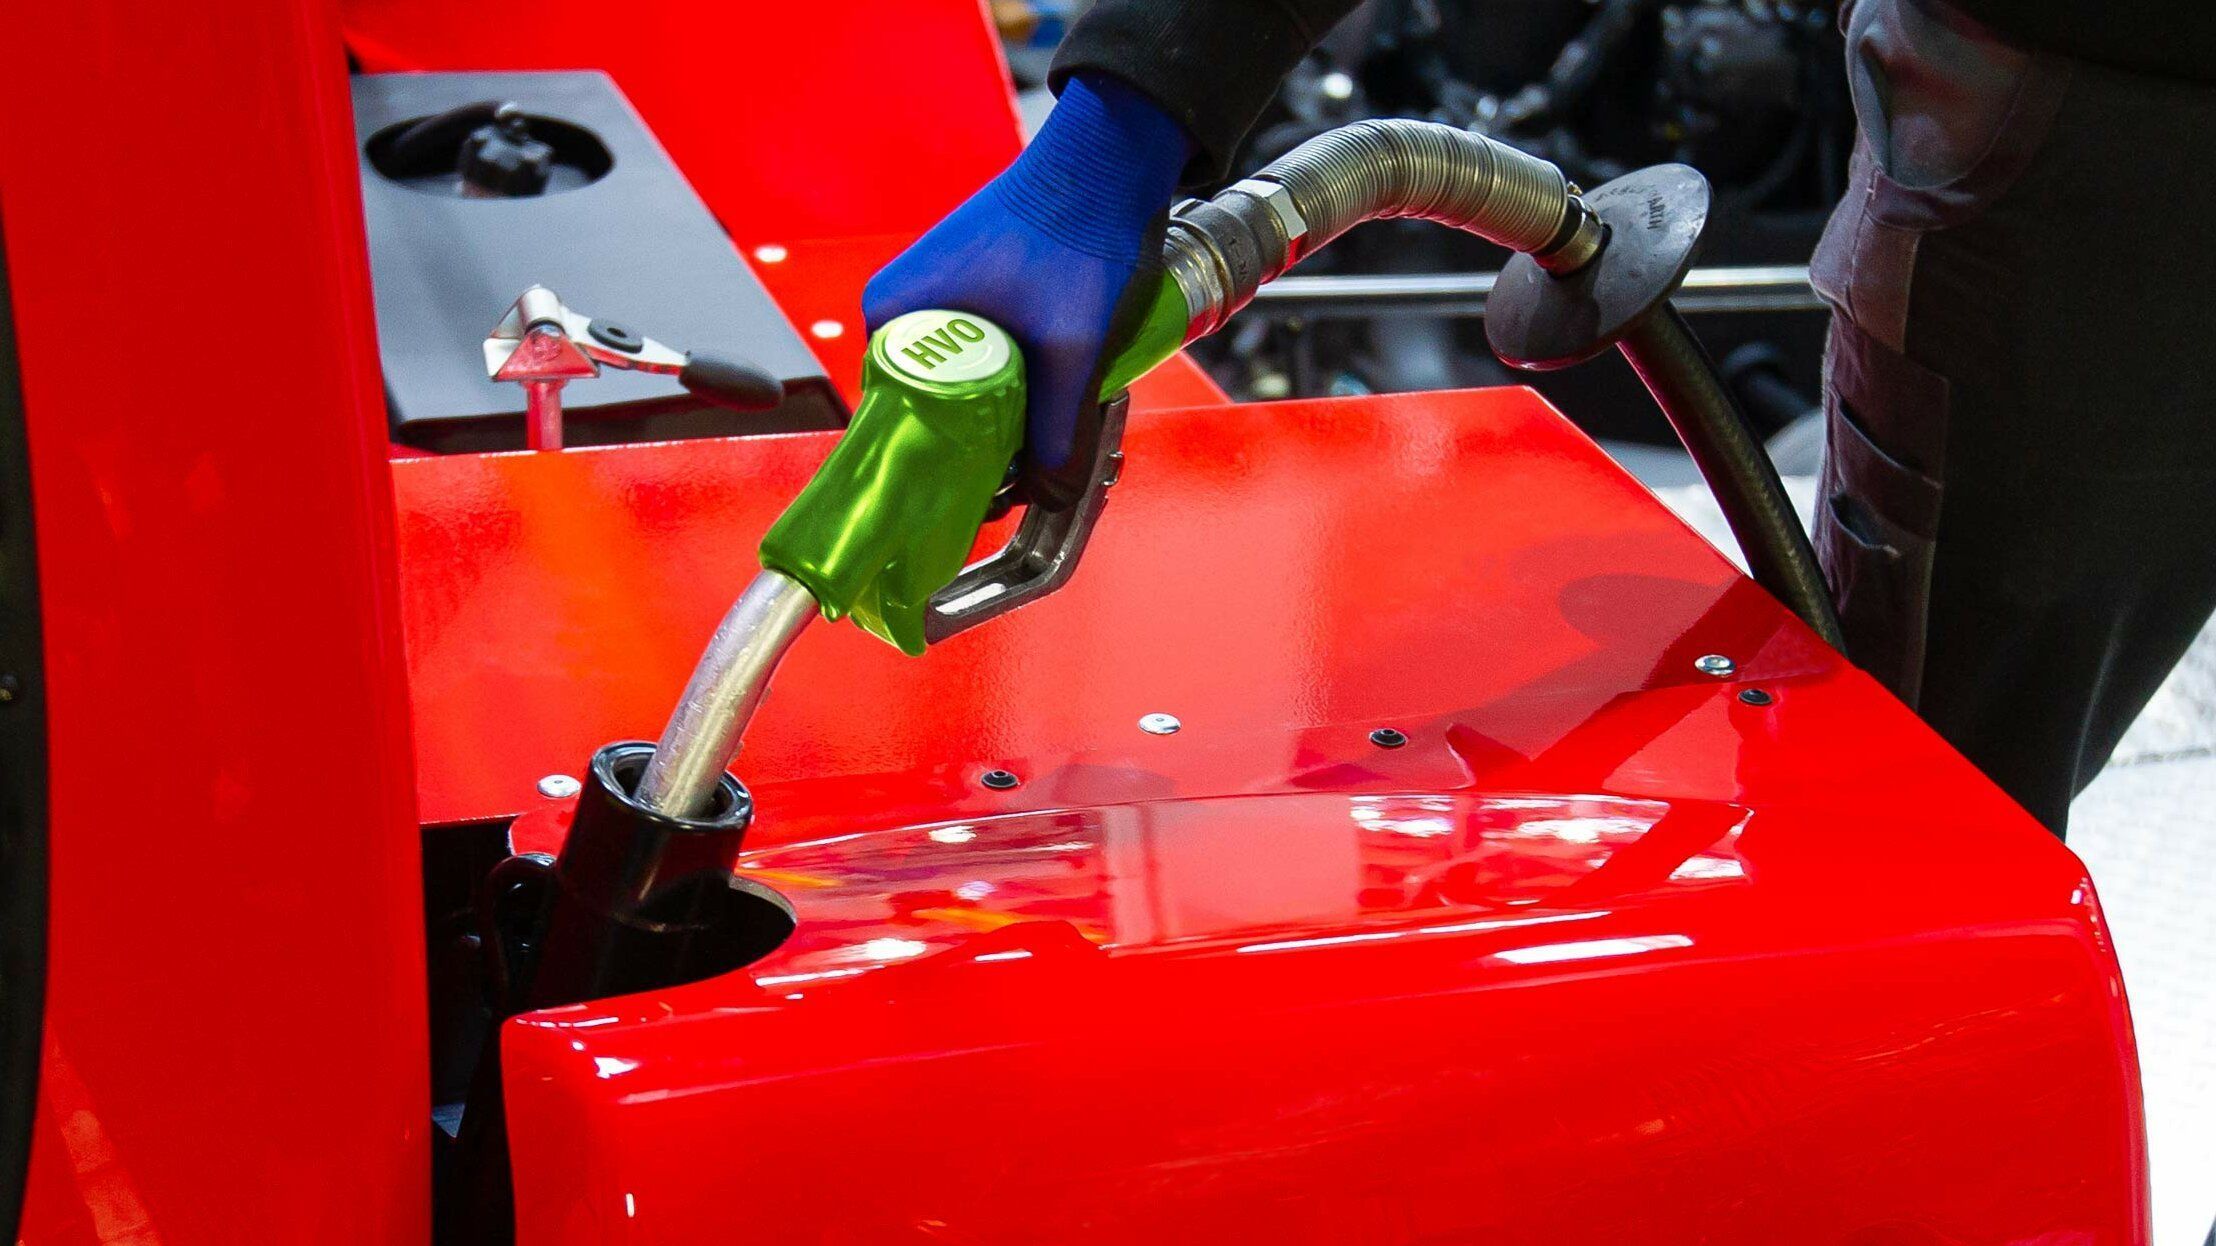 A PistenBully is refueled with HVO fuel